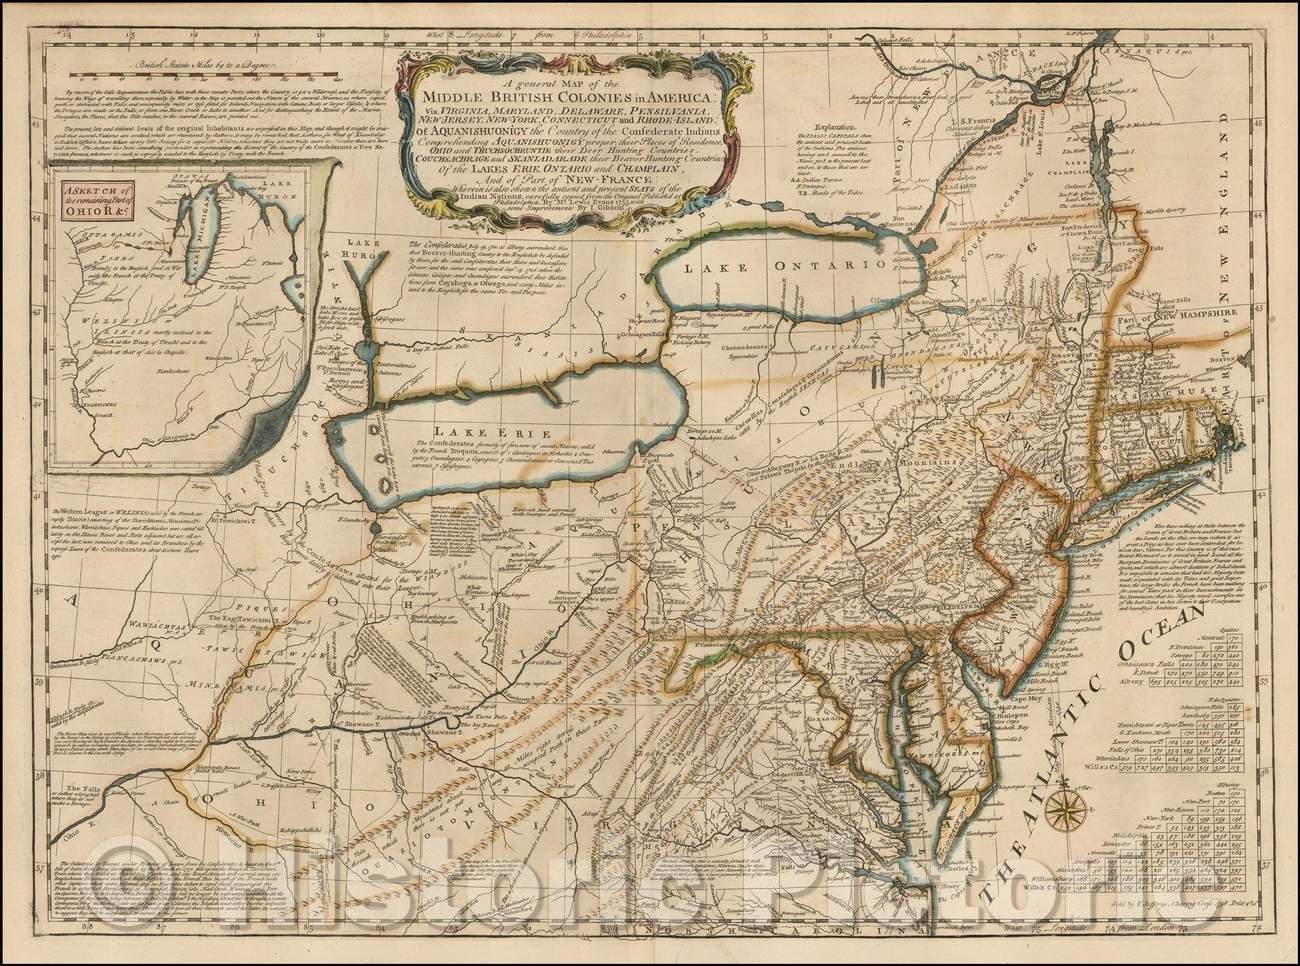 Historic Map - Middle British Colonies in America, Virginia, Maryland, Delaware, Pennsylvania, New-Jersey, New-York, Connecticut & Rhode Island, 1755 - Vintage Wall Art